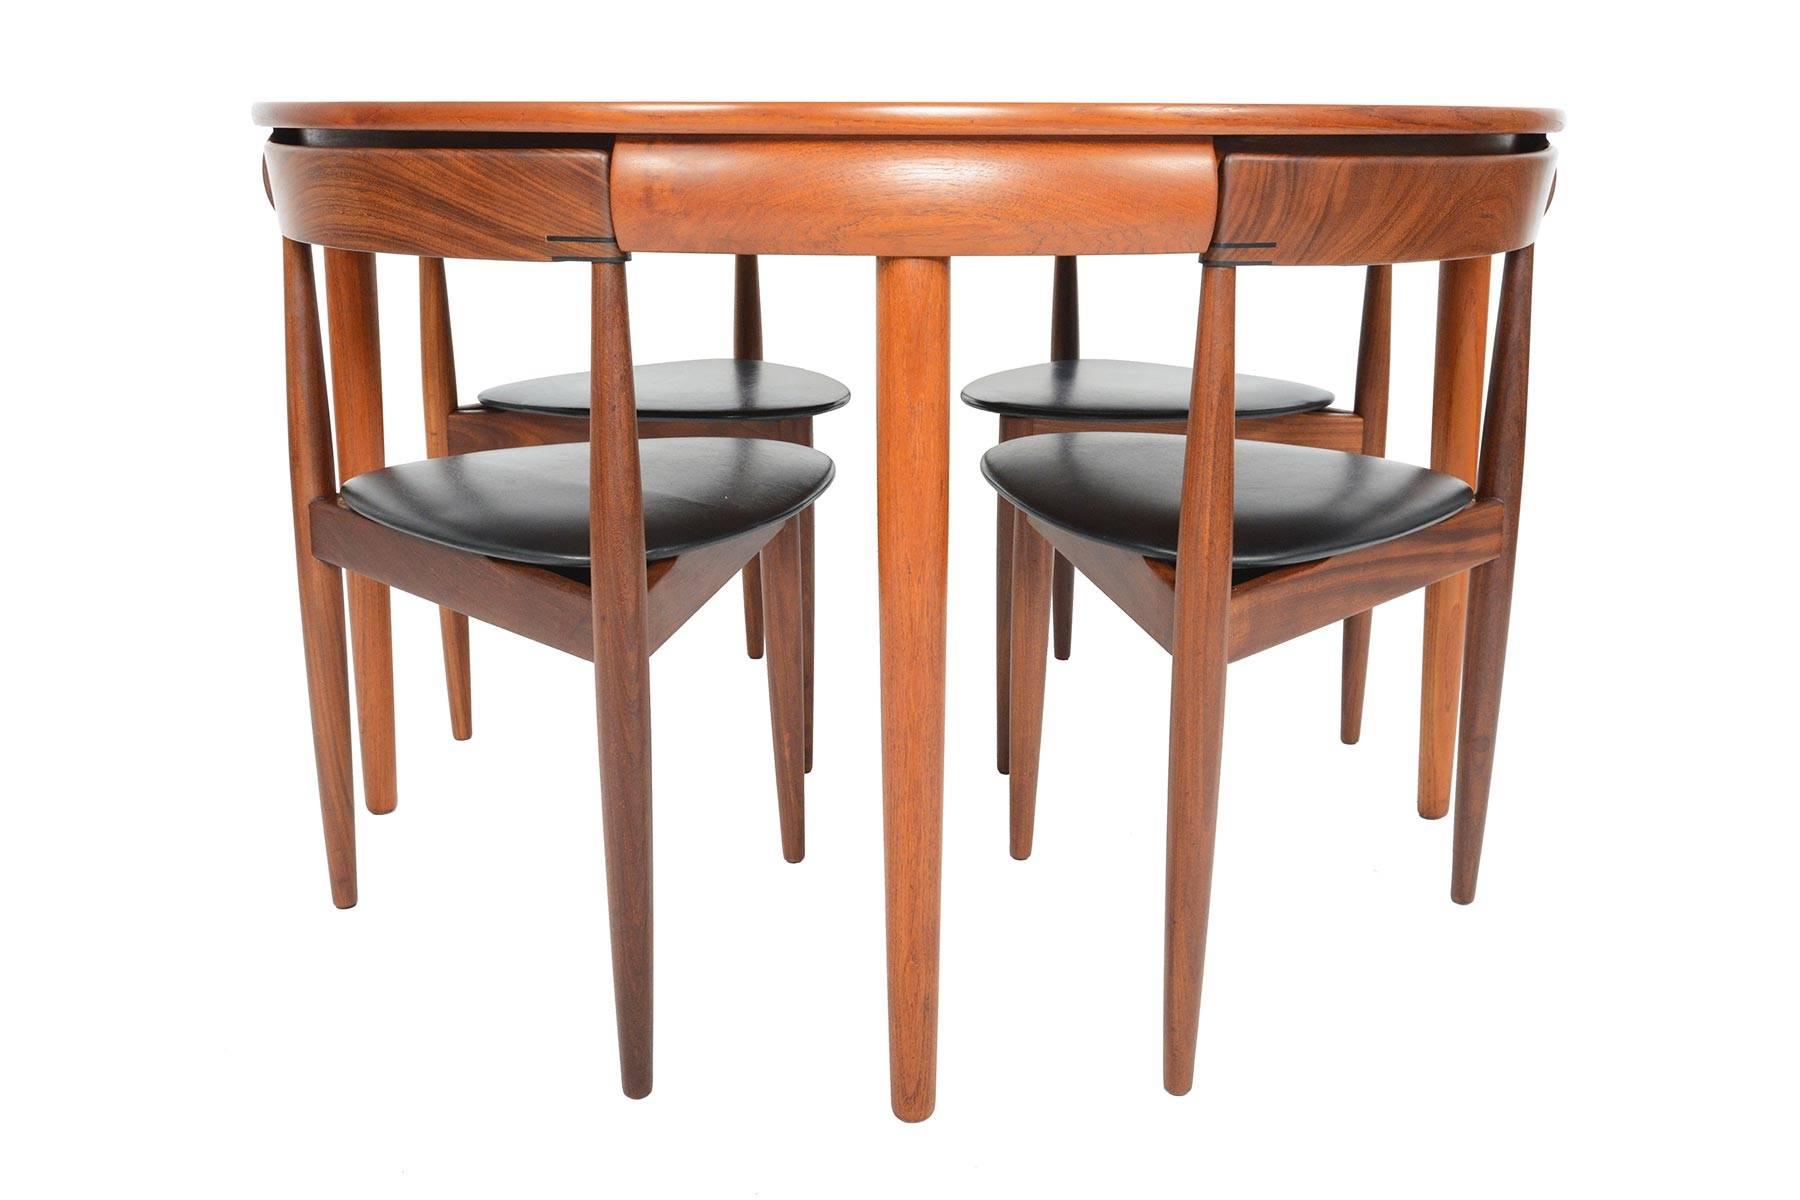 This highly sought after Danish modern “Roundette” dining set was designed by Hans Olsen for Frem Røjle Møbelfrabrik in 1952. Crafted in teak, this set is uniquely designed to nest four chairs into the banding for a seamless look. The chairs feature